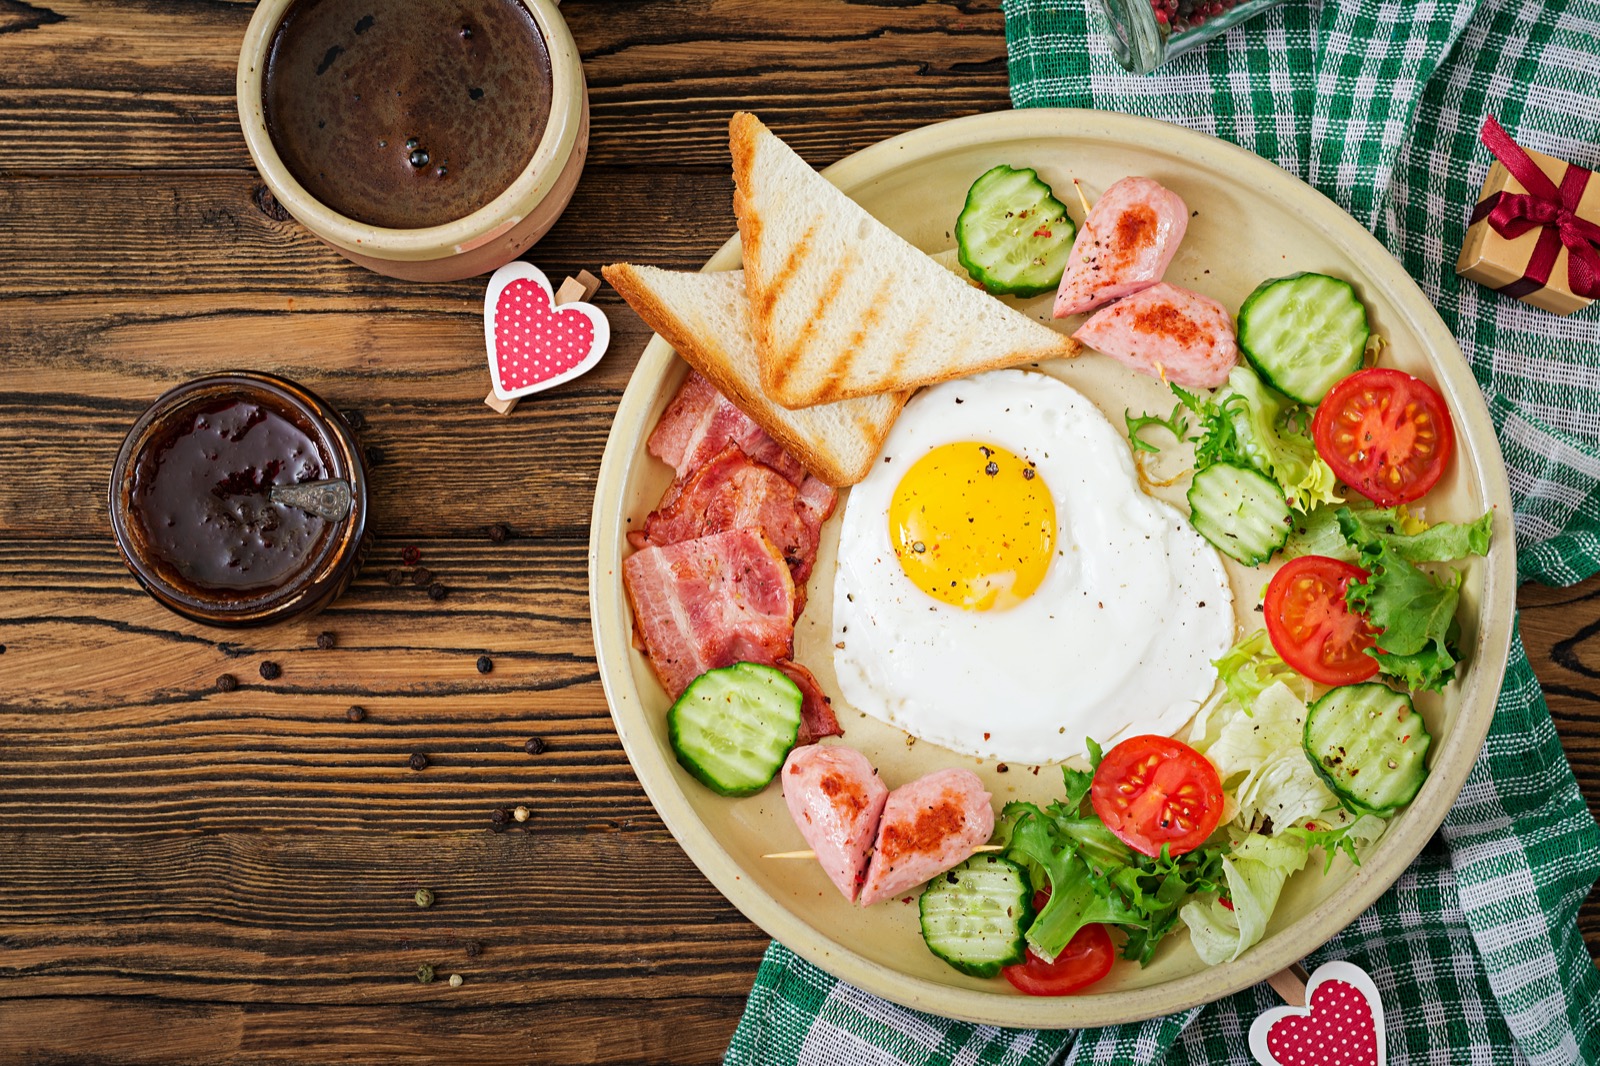 🥘 I Bet We Can Guess Your Age Based on the Food You’d Rather Eat Breakfast heart-shaped Fried Egg